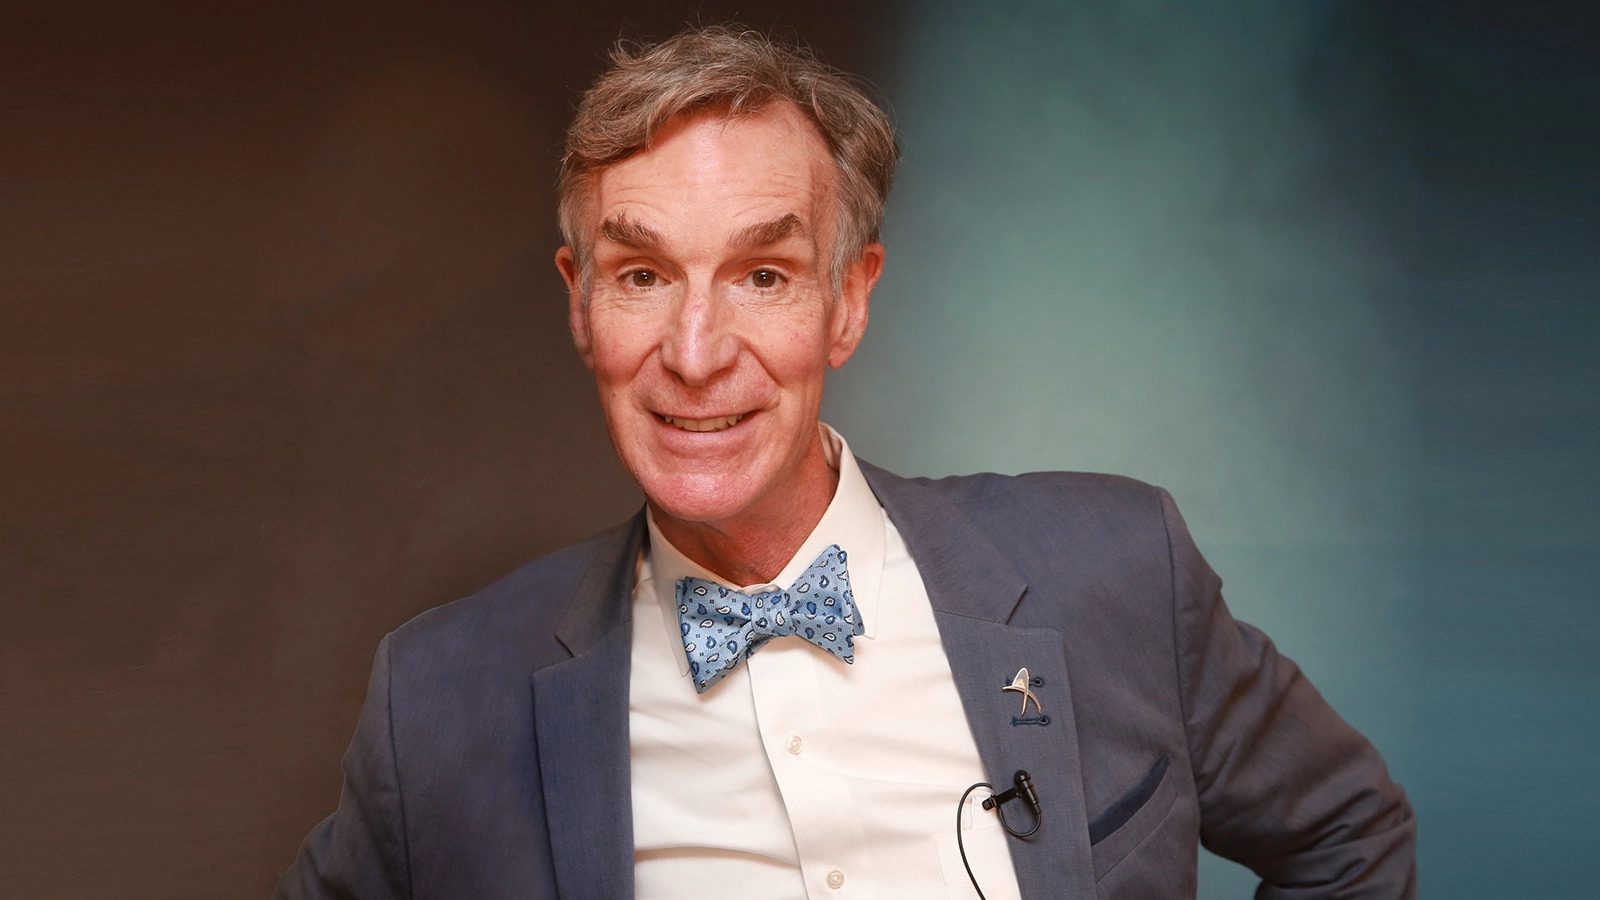 Lessons From Bill Nye